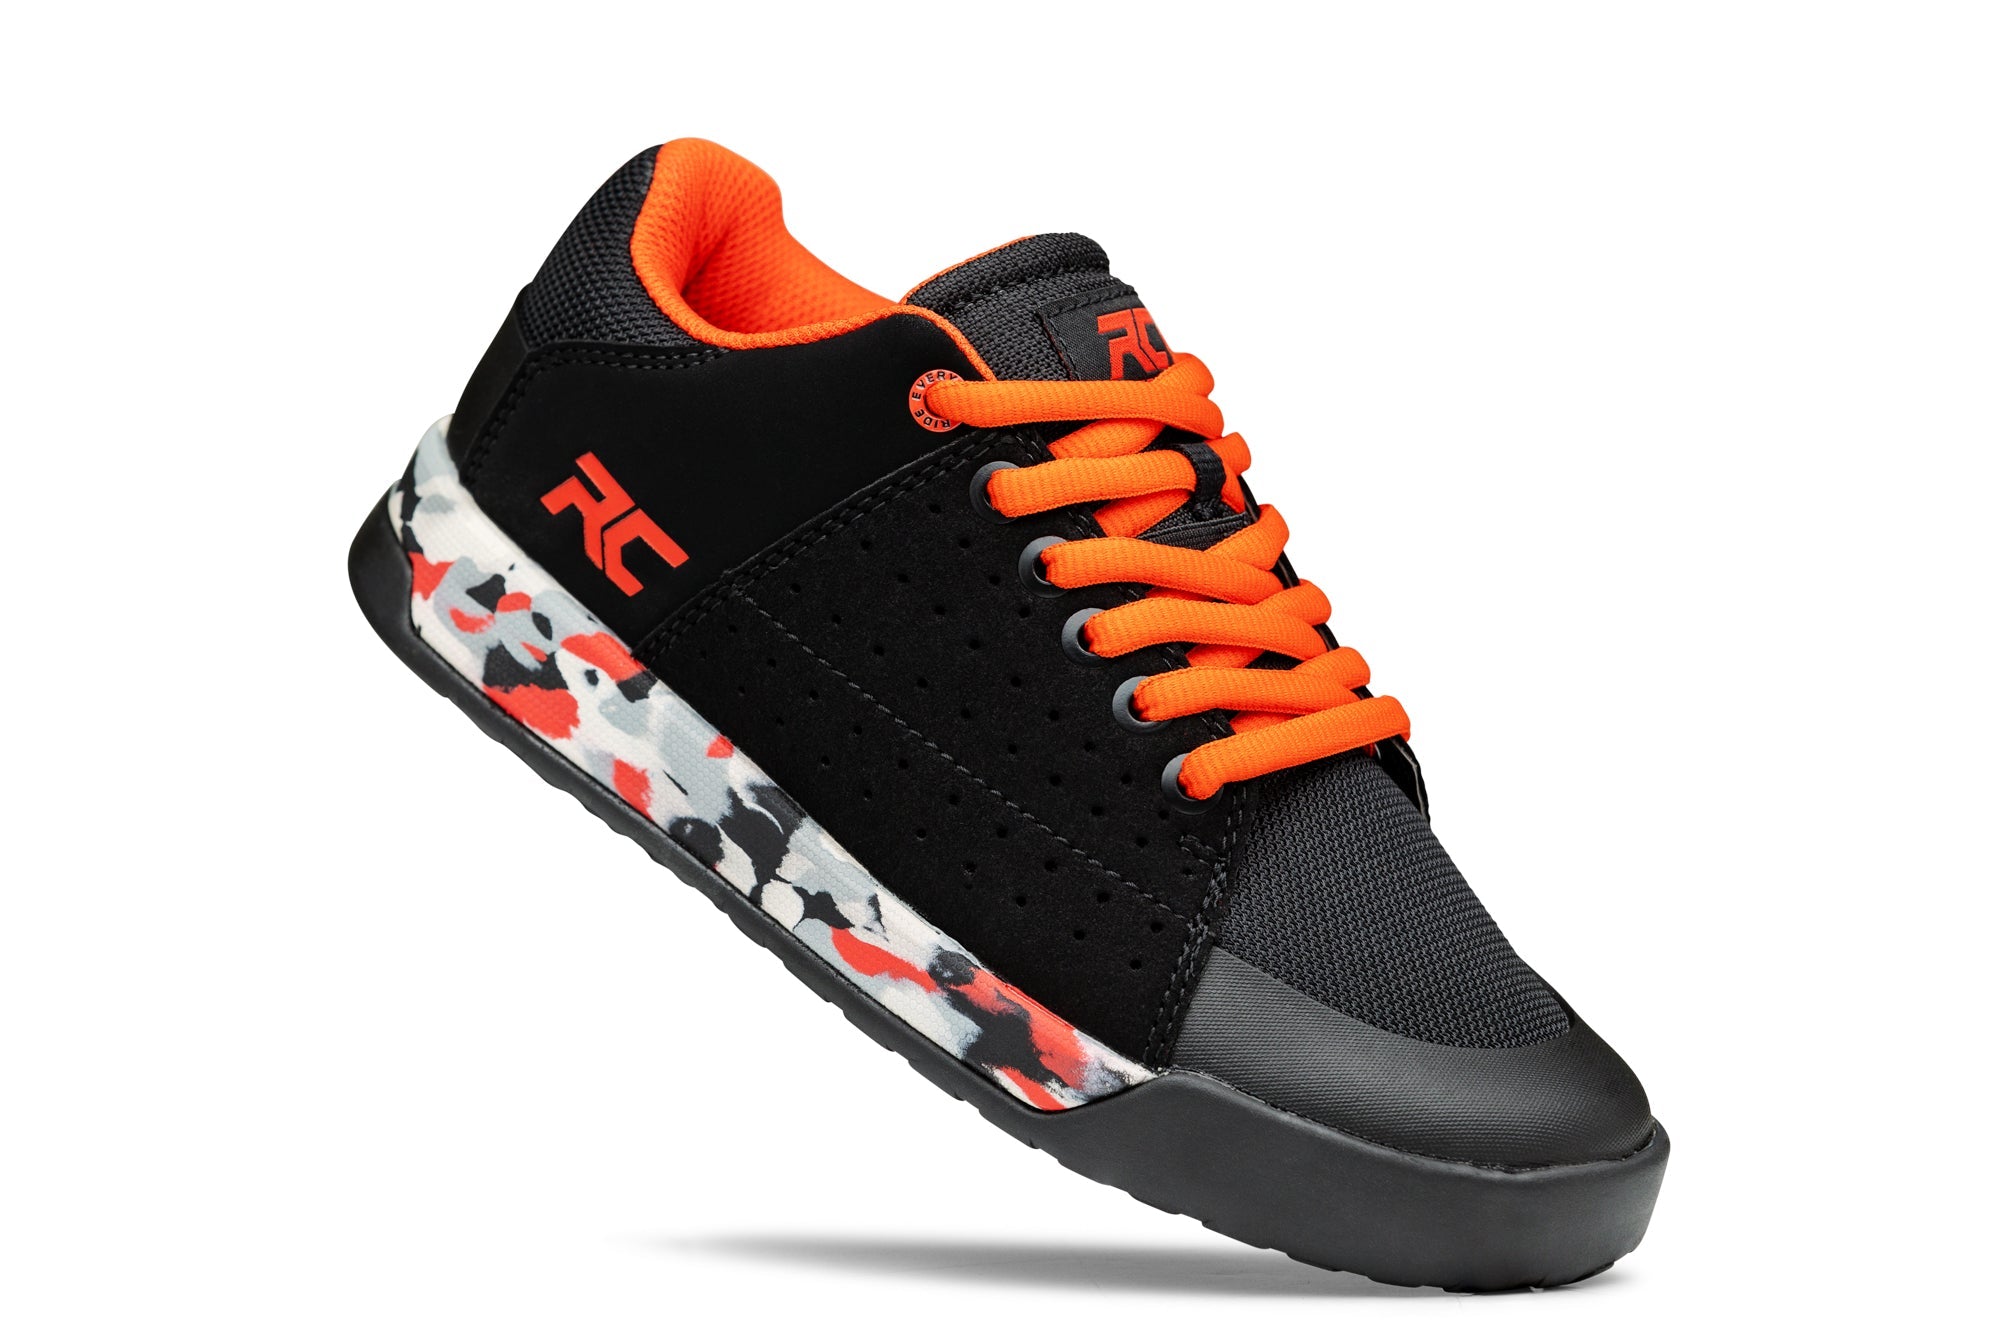 Ride Concepts x TGR Livewire Youth MTB Shoes - Teton Gravity Research